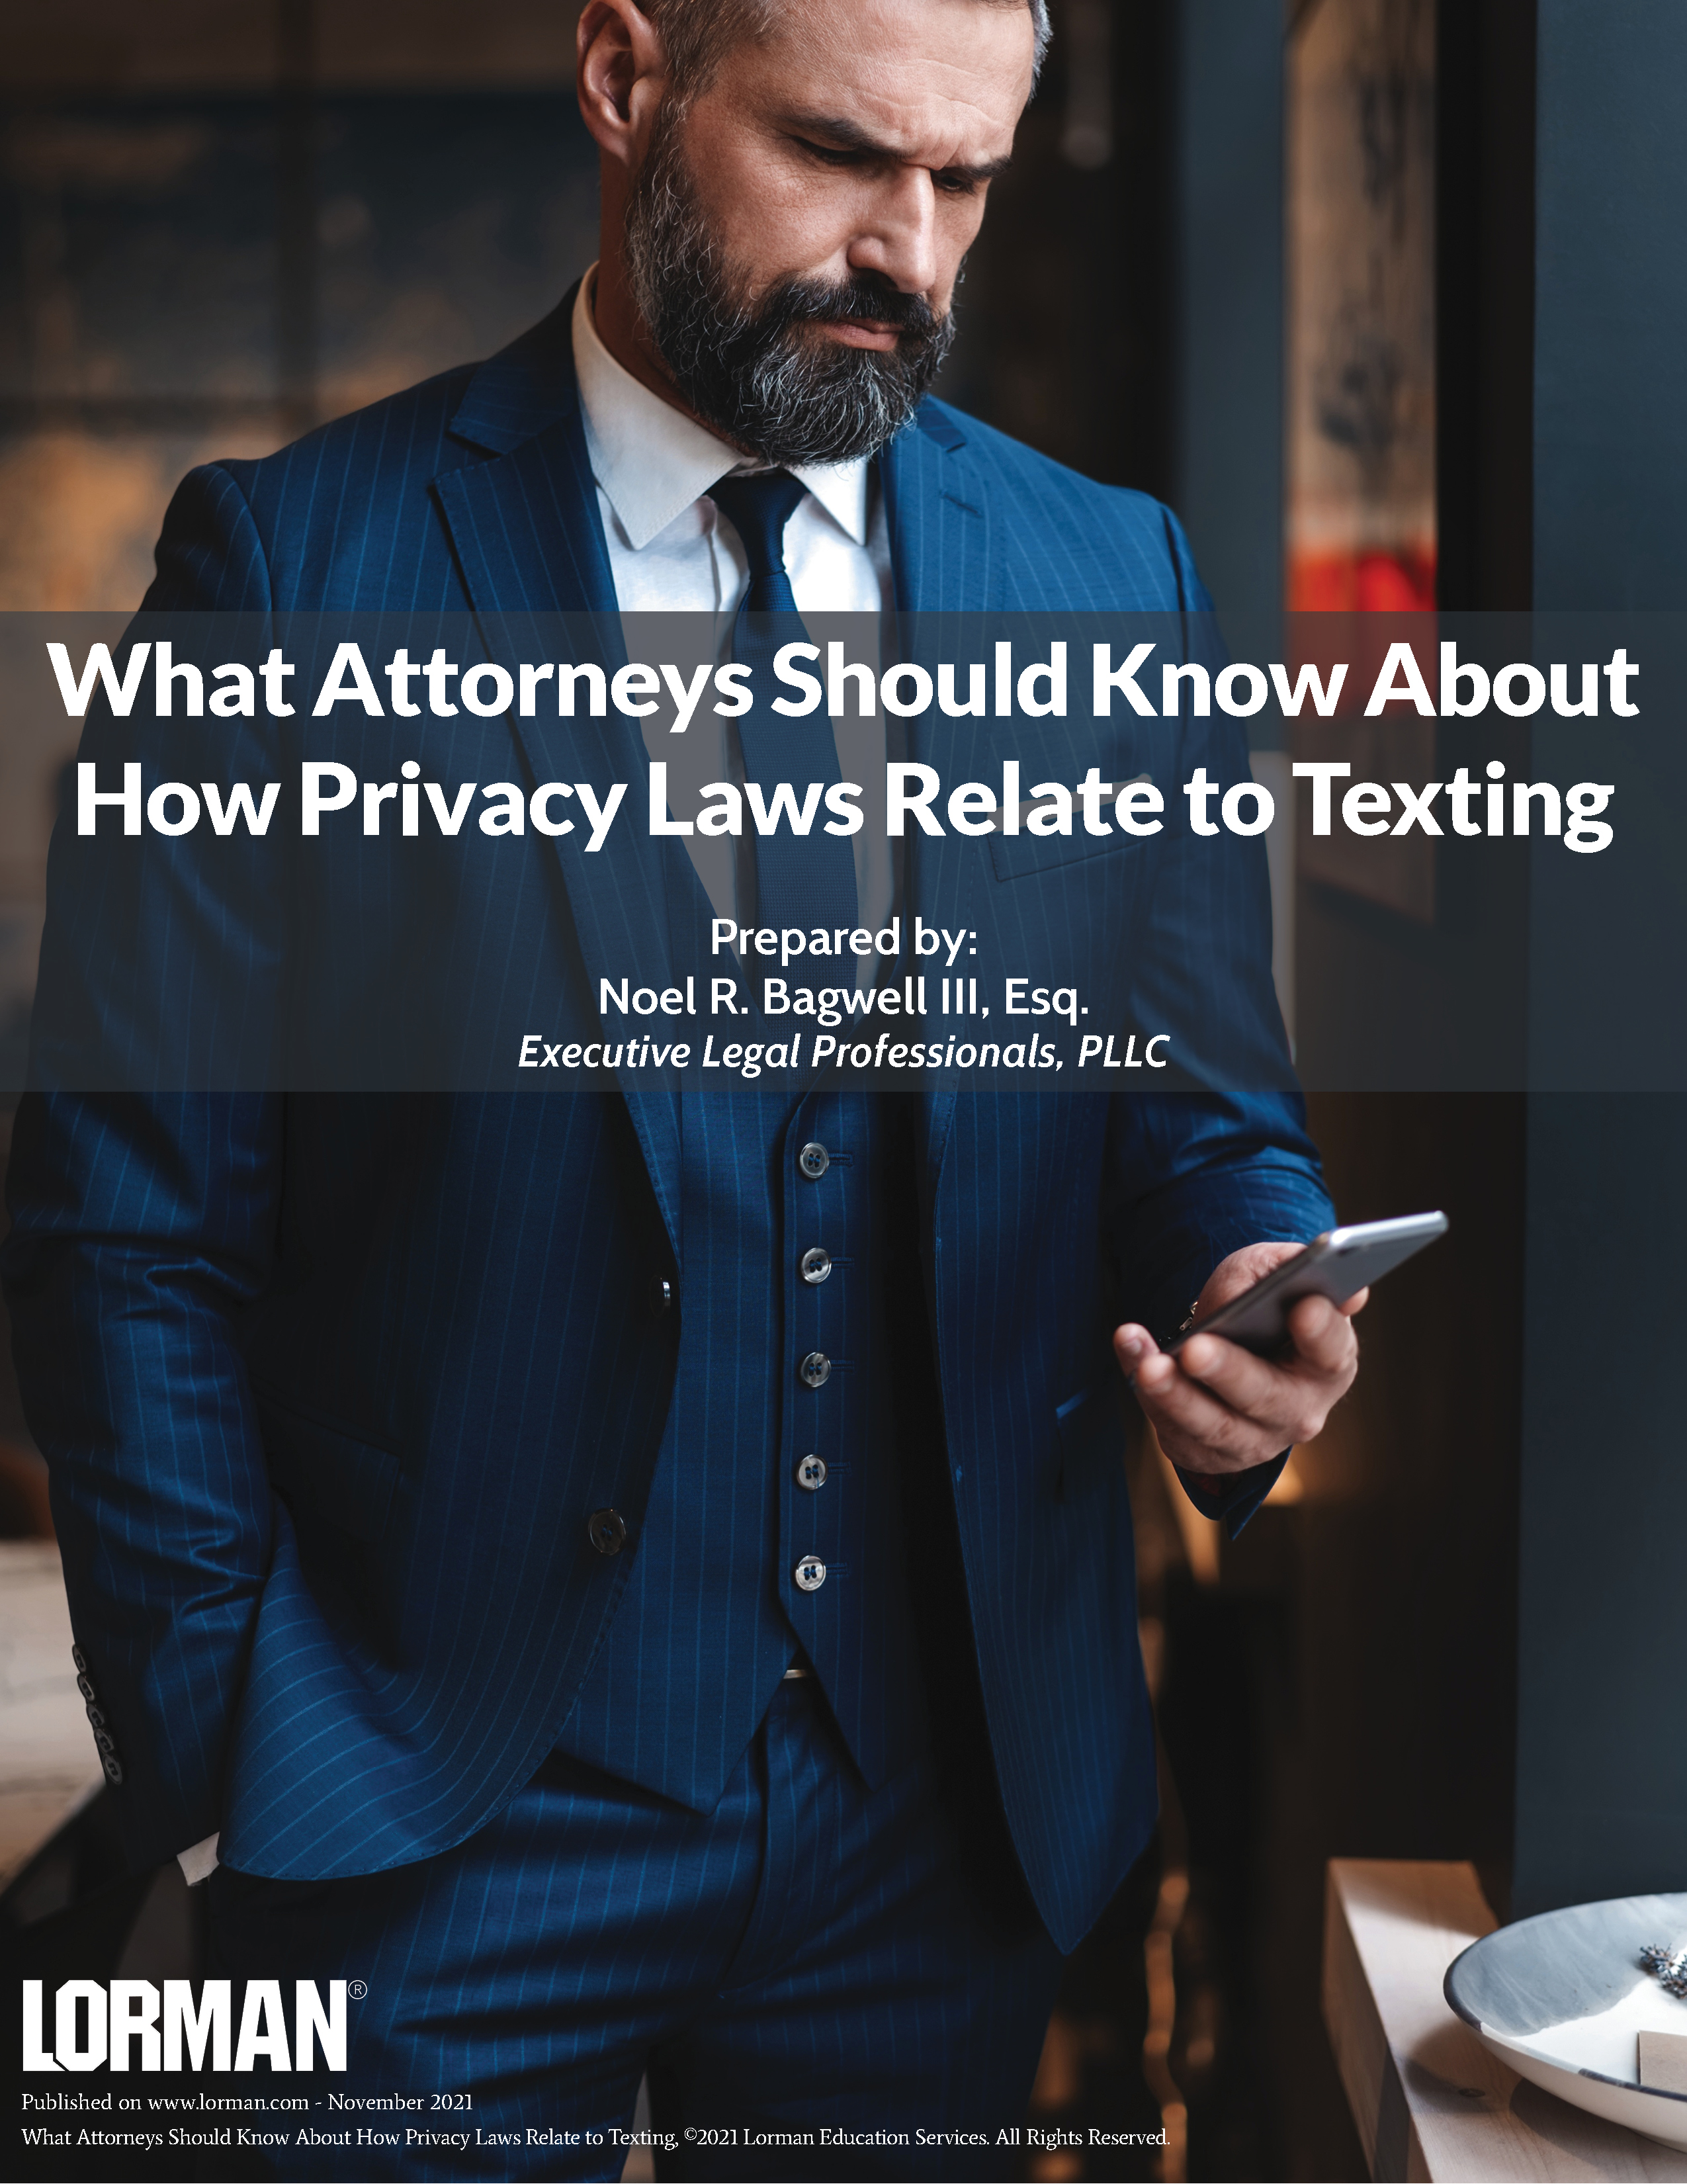 What Attorneys Should Know About How Privacy Laws Relate to Texting